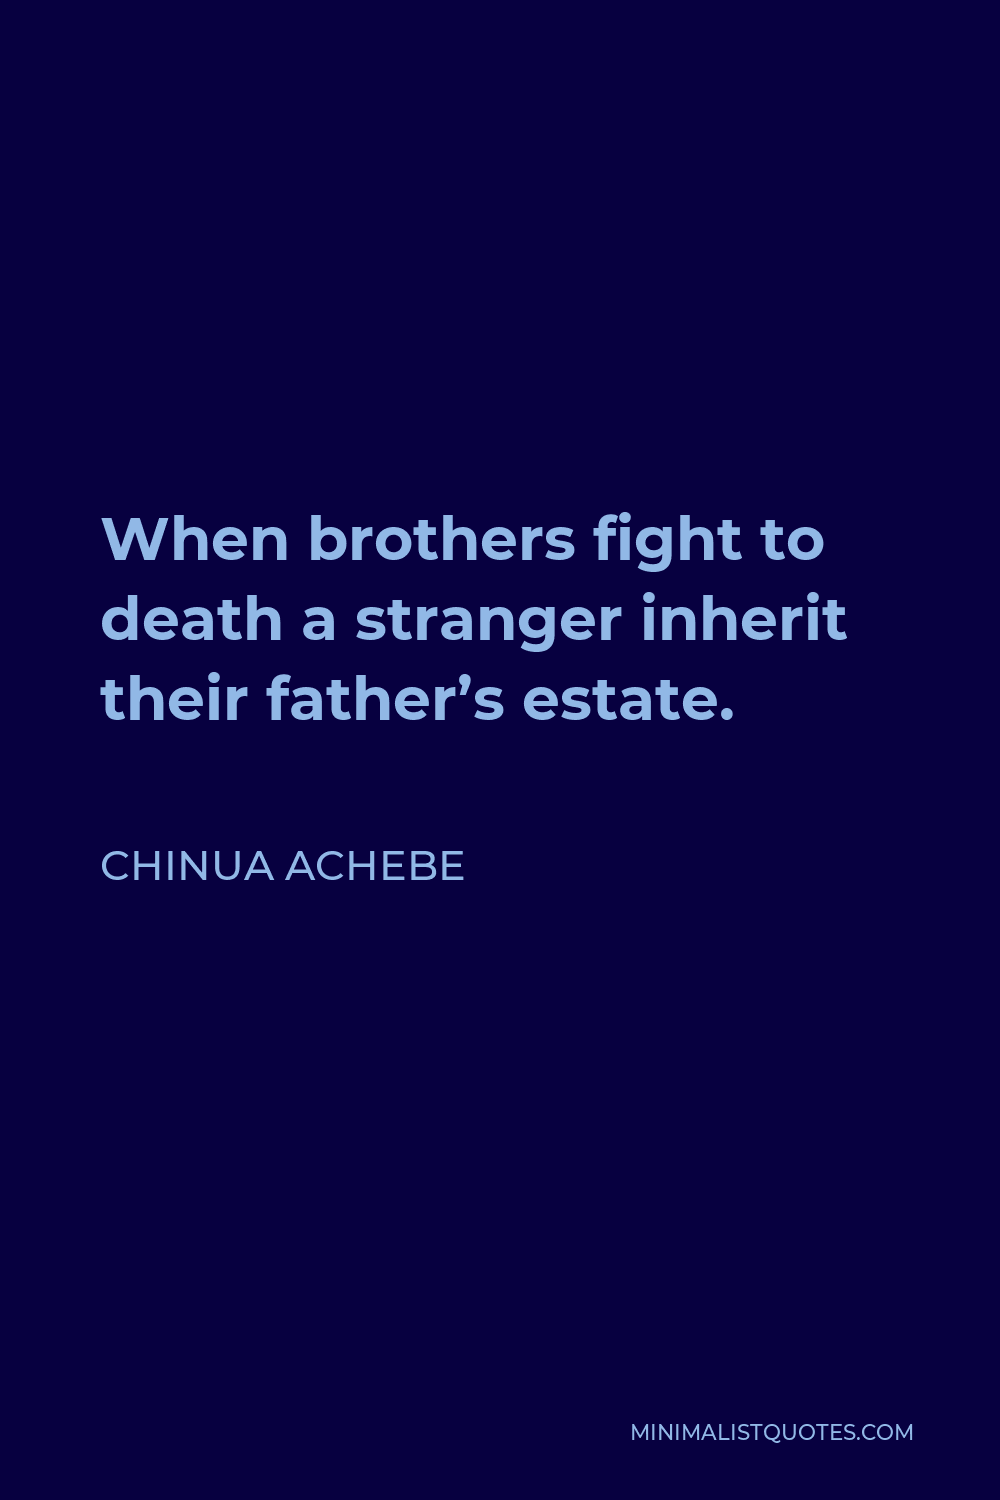 Chinua Achebe Quote - When brothers fight to death a stranger inherit their father’s estate.